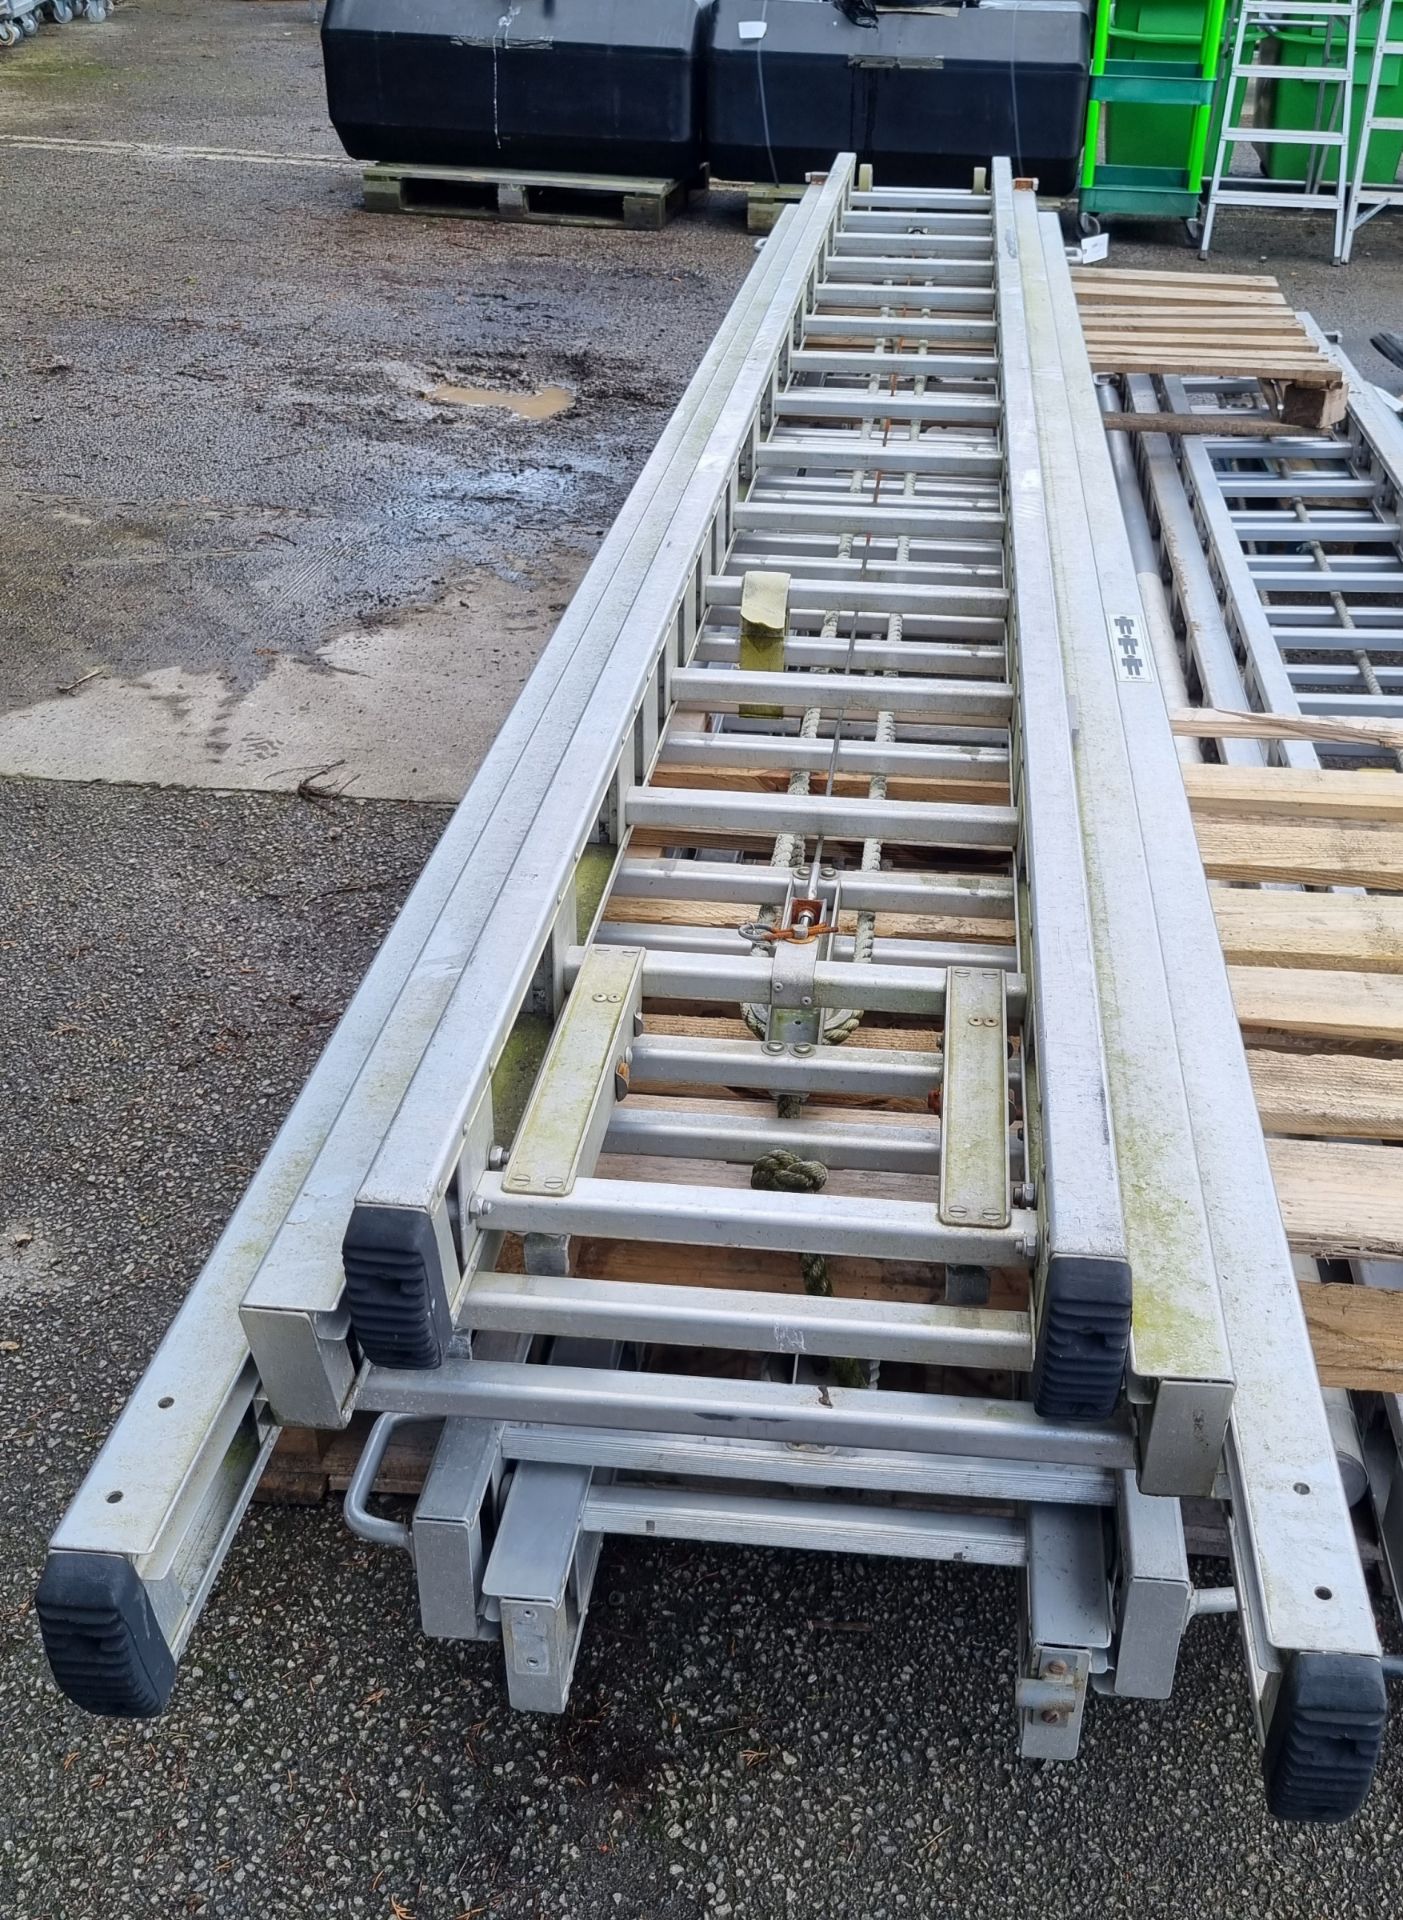 AS Fire & Rescue equipment ladder - 3 section - 14 rungs per section - approx 4M in length - Image 3 of 3